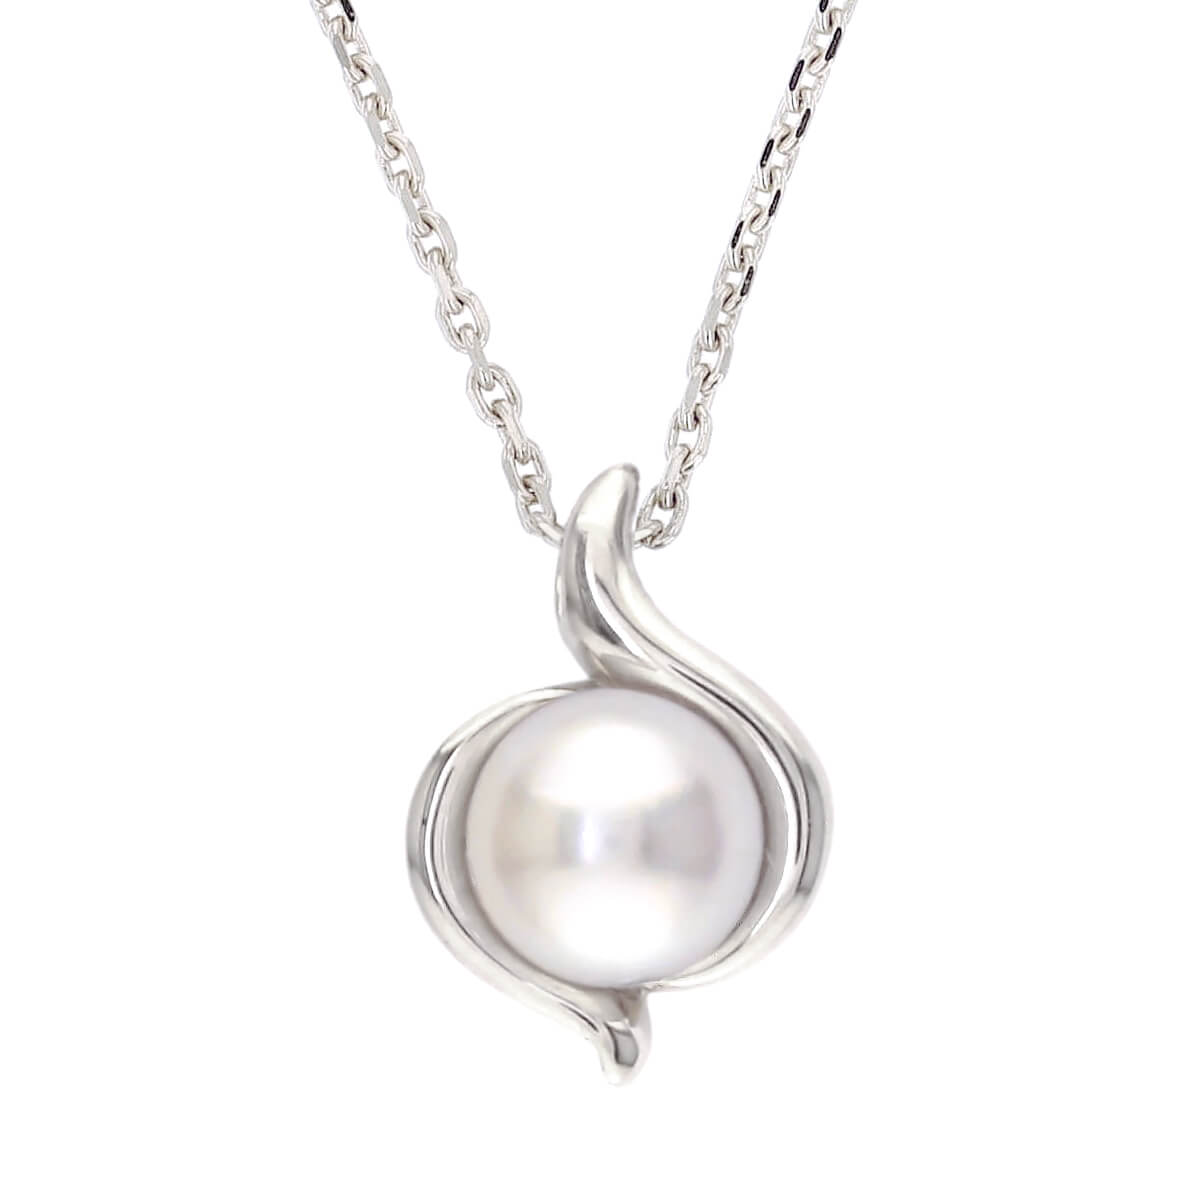 6.5mm Akoya cultured saltwater pearl 18ct white gold pendant with chain,18kt, designer, handmade by Faller, Derry/ Londonderry, hand crafted, precious jewellery, jewelry